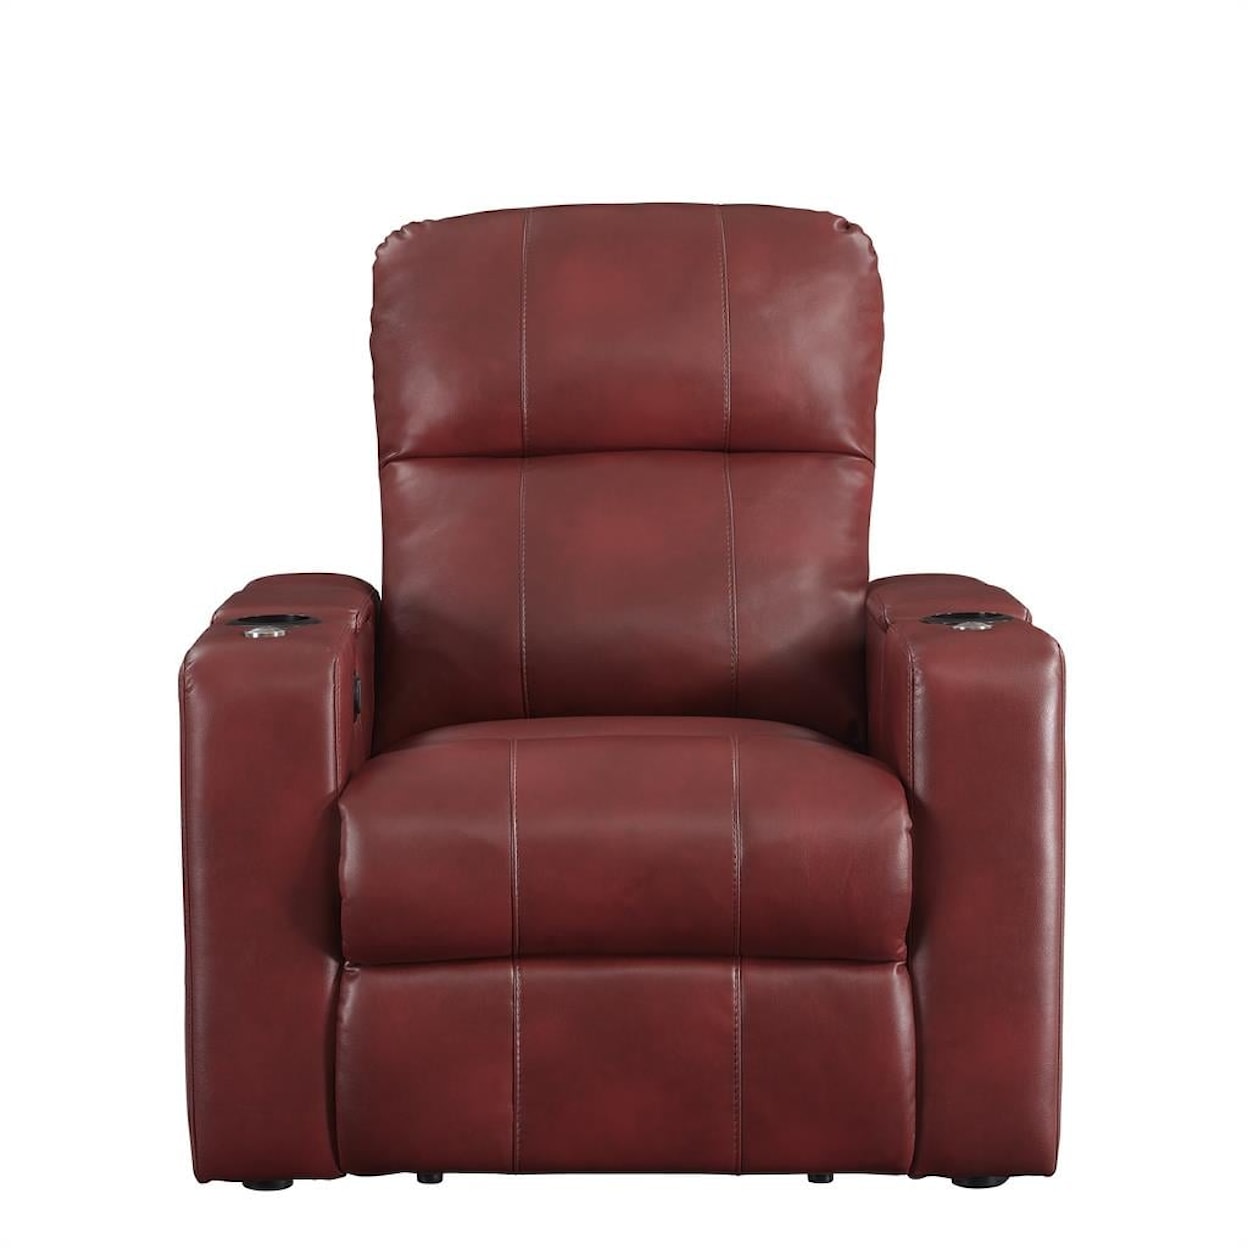 Prime Resources International Larson Home Theater Recliner